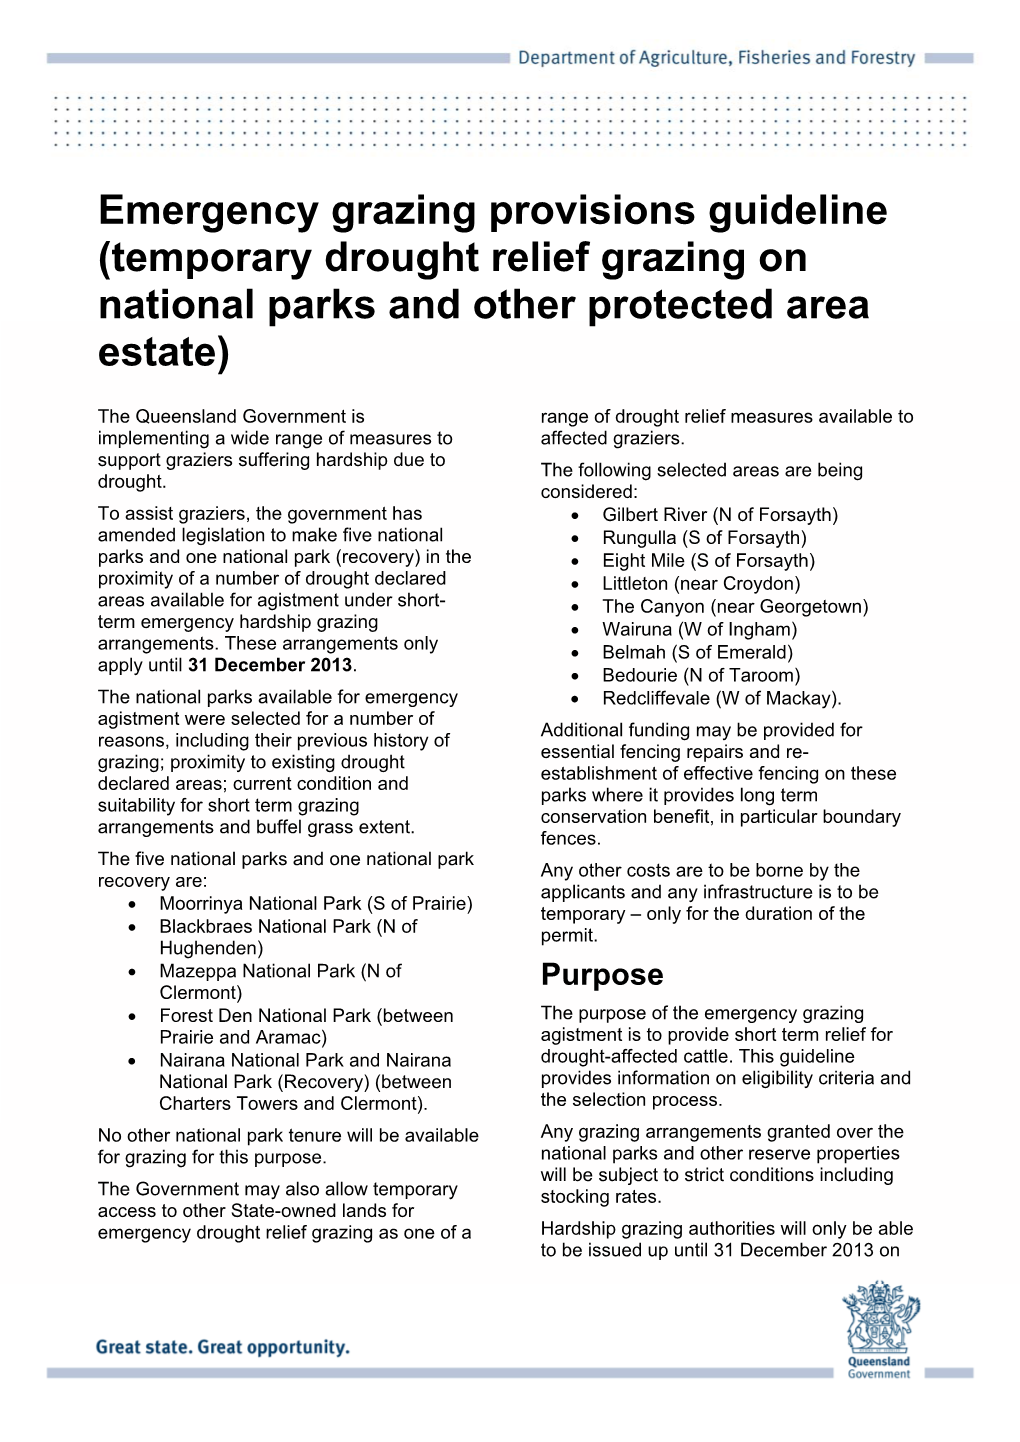 Emergency Grazing Provisions Guideline (Temporary Drought Relief Grazing on National Parks and Other Protected Area Estate)